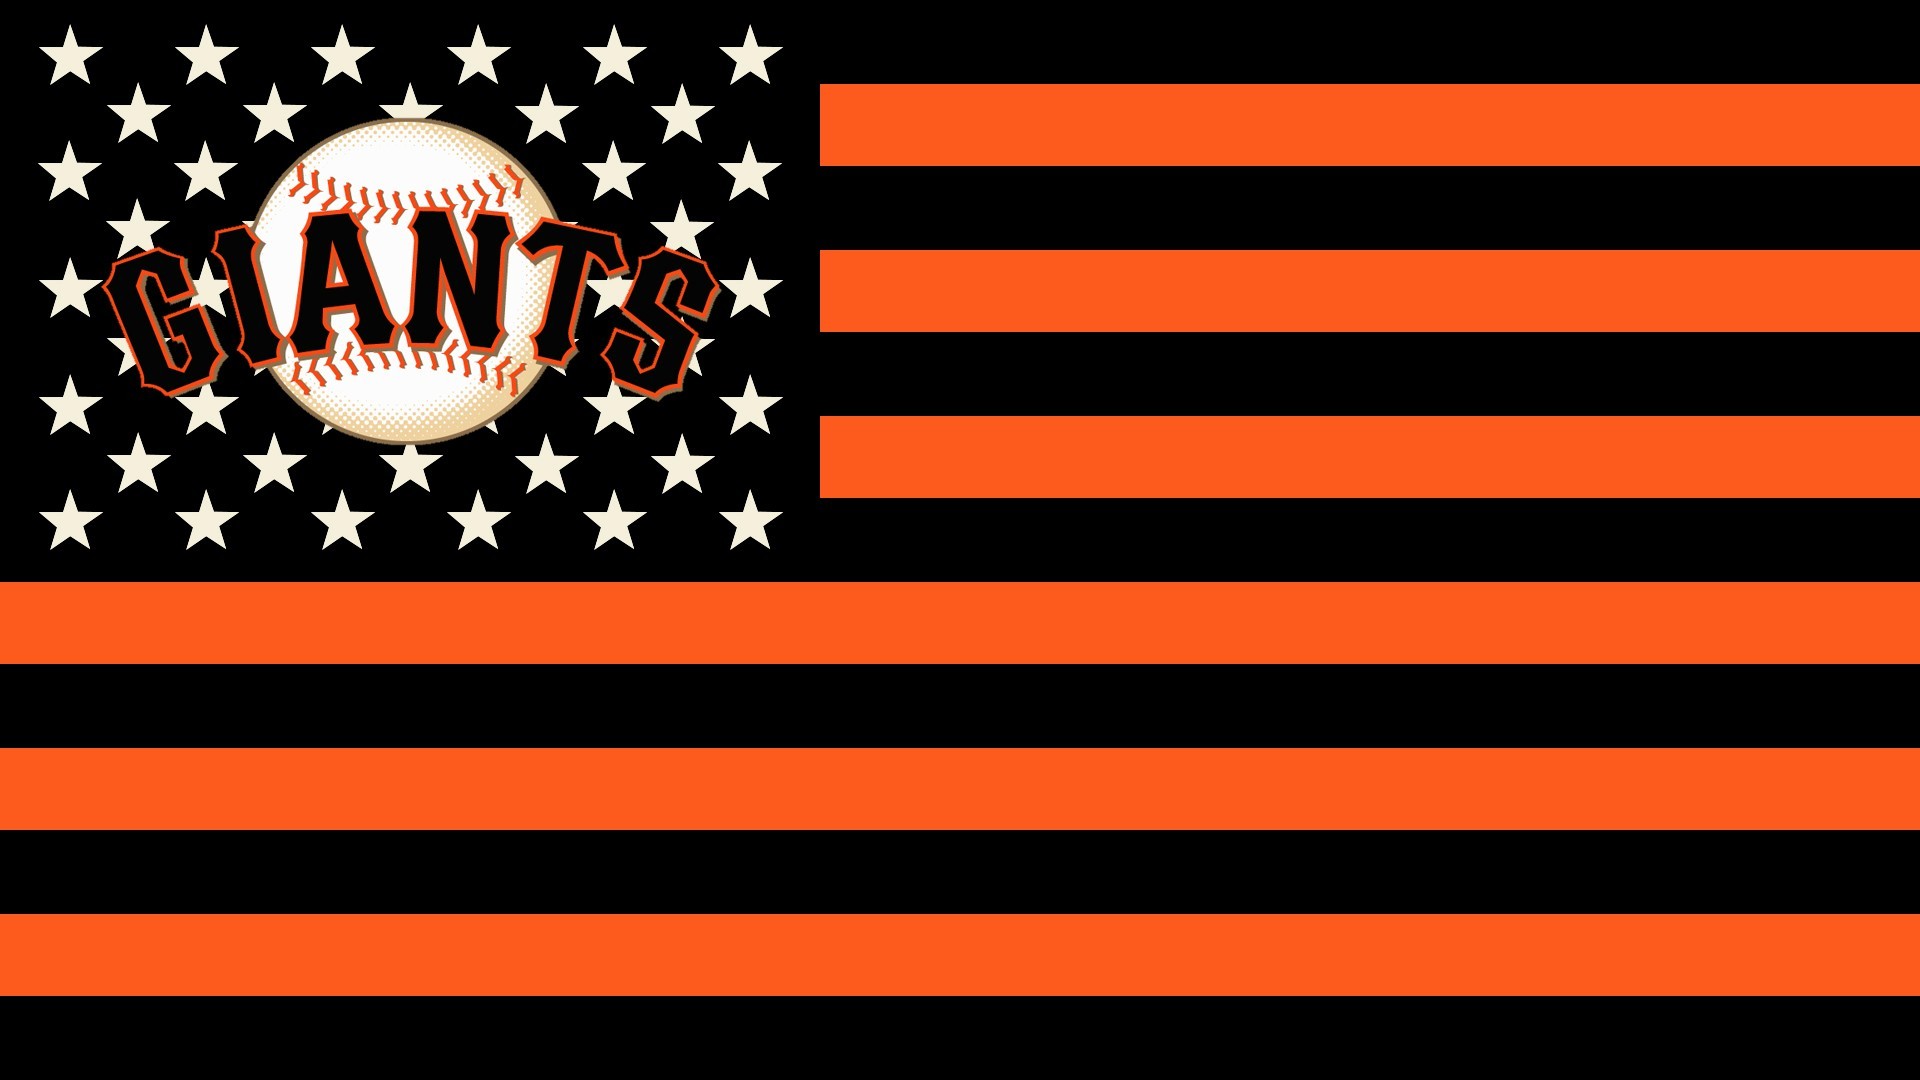 San Francisco Giants Wallpapers (70+ pictures)